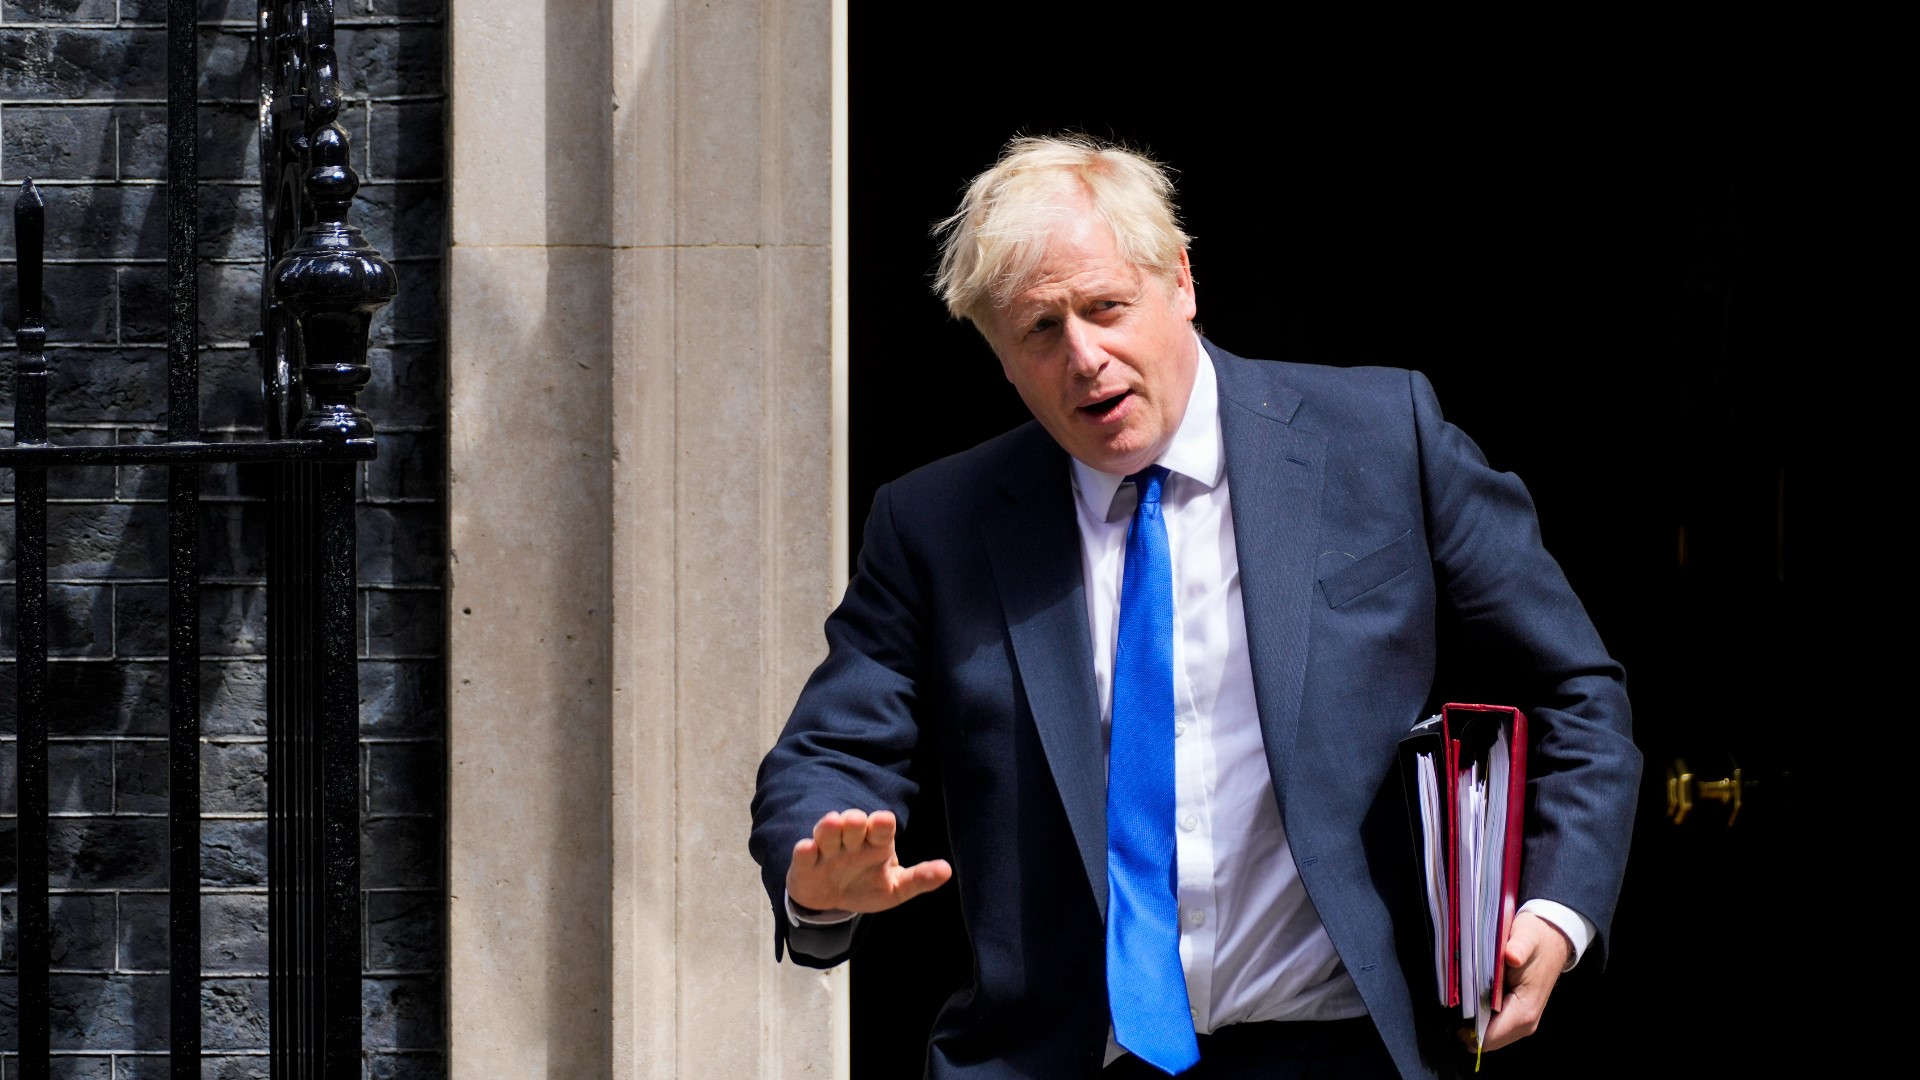 It was not immediately clear whether Johnson will stay in office while the Conservative Party chooses a new leader, who will replace him as Prime Minister.